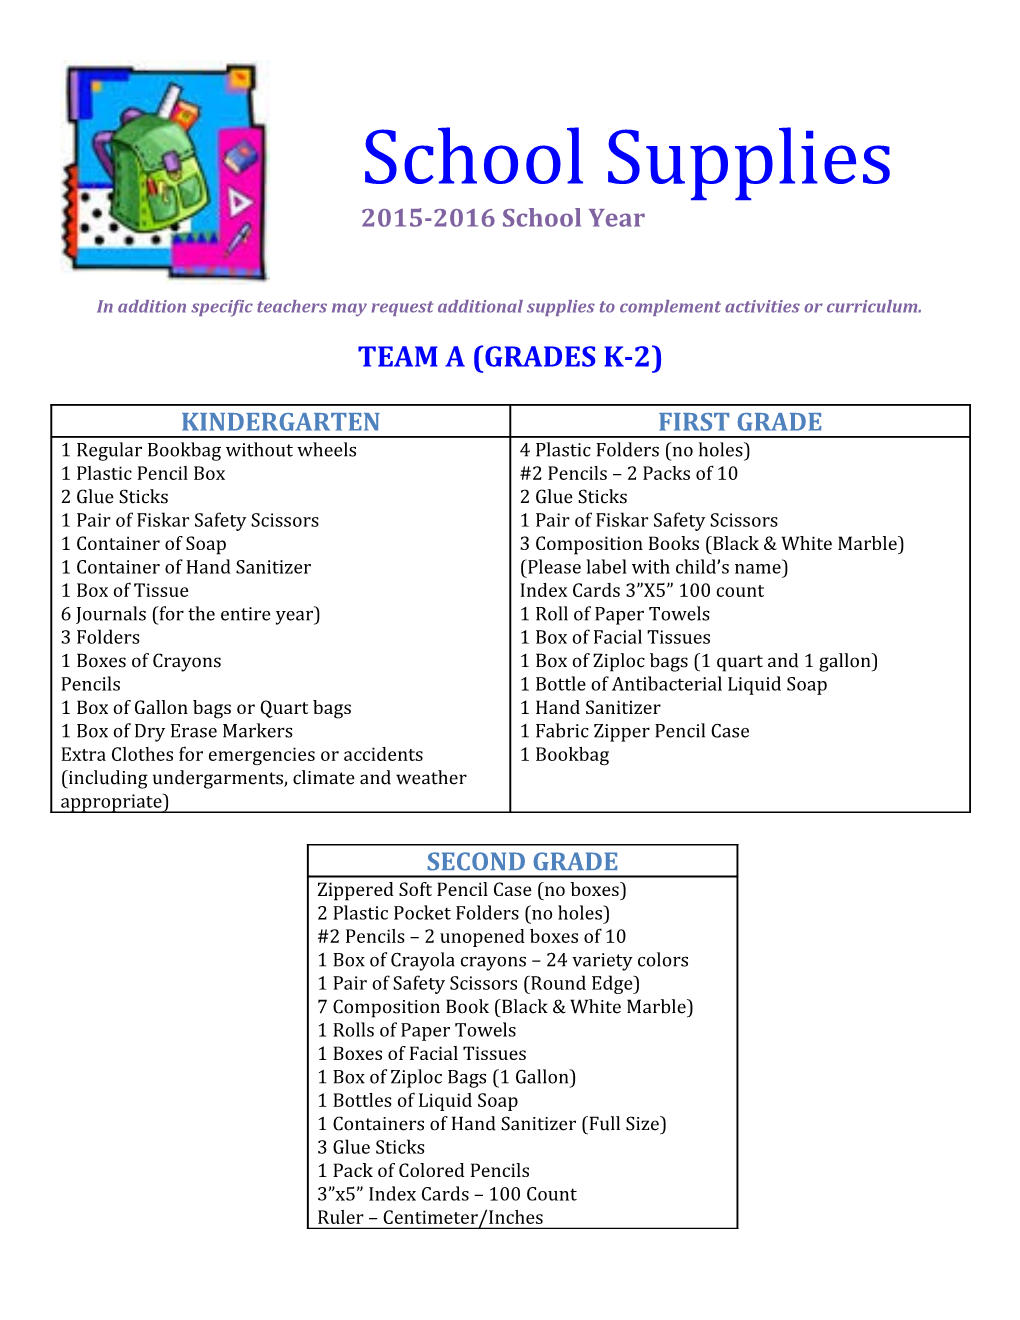 In Addition Specific Teachers May Request Additional Supplies to Complement Activities